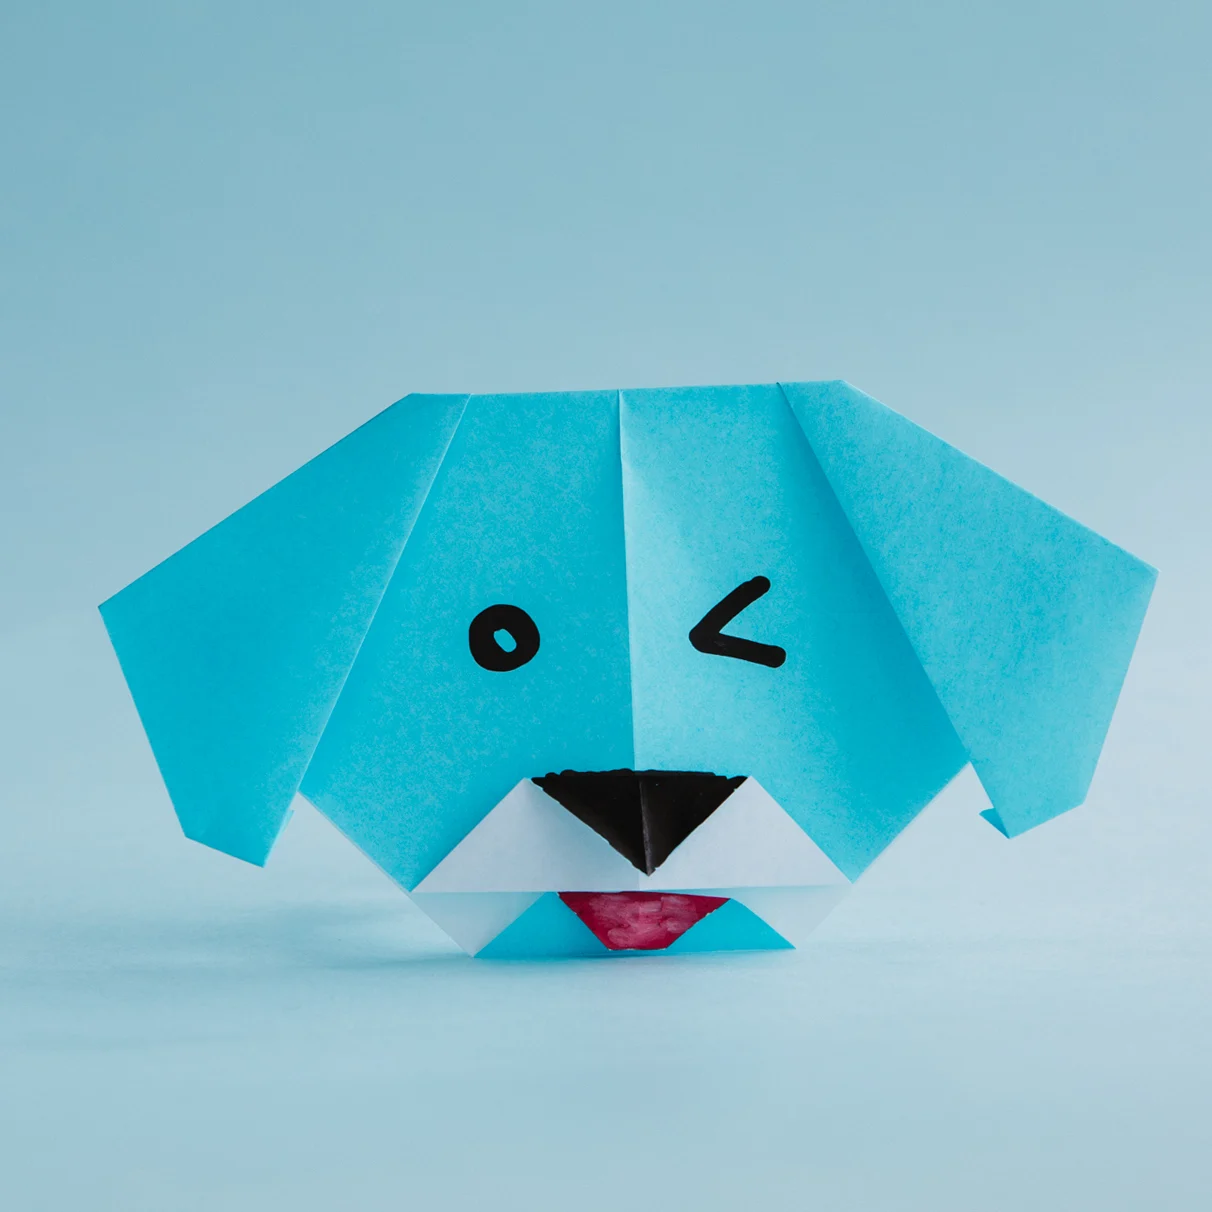 how to make origami dog face | origami ok